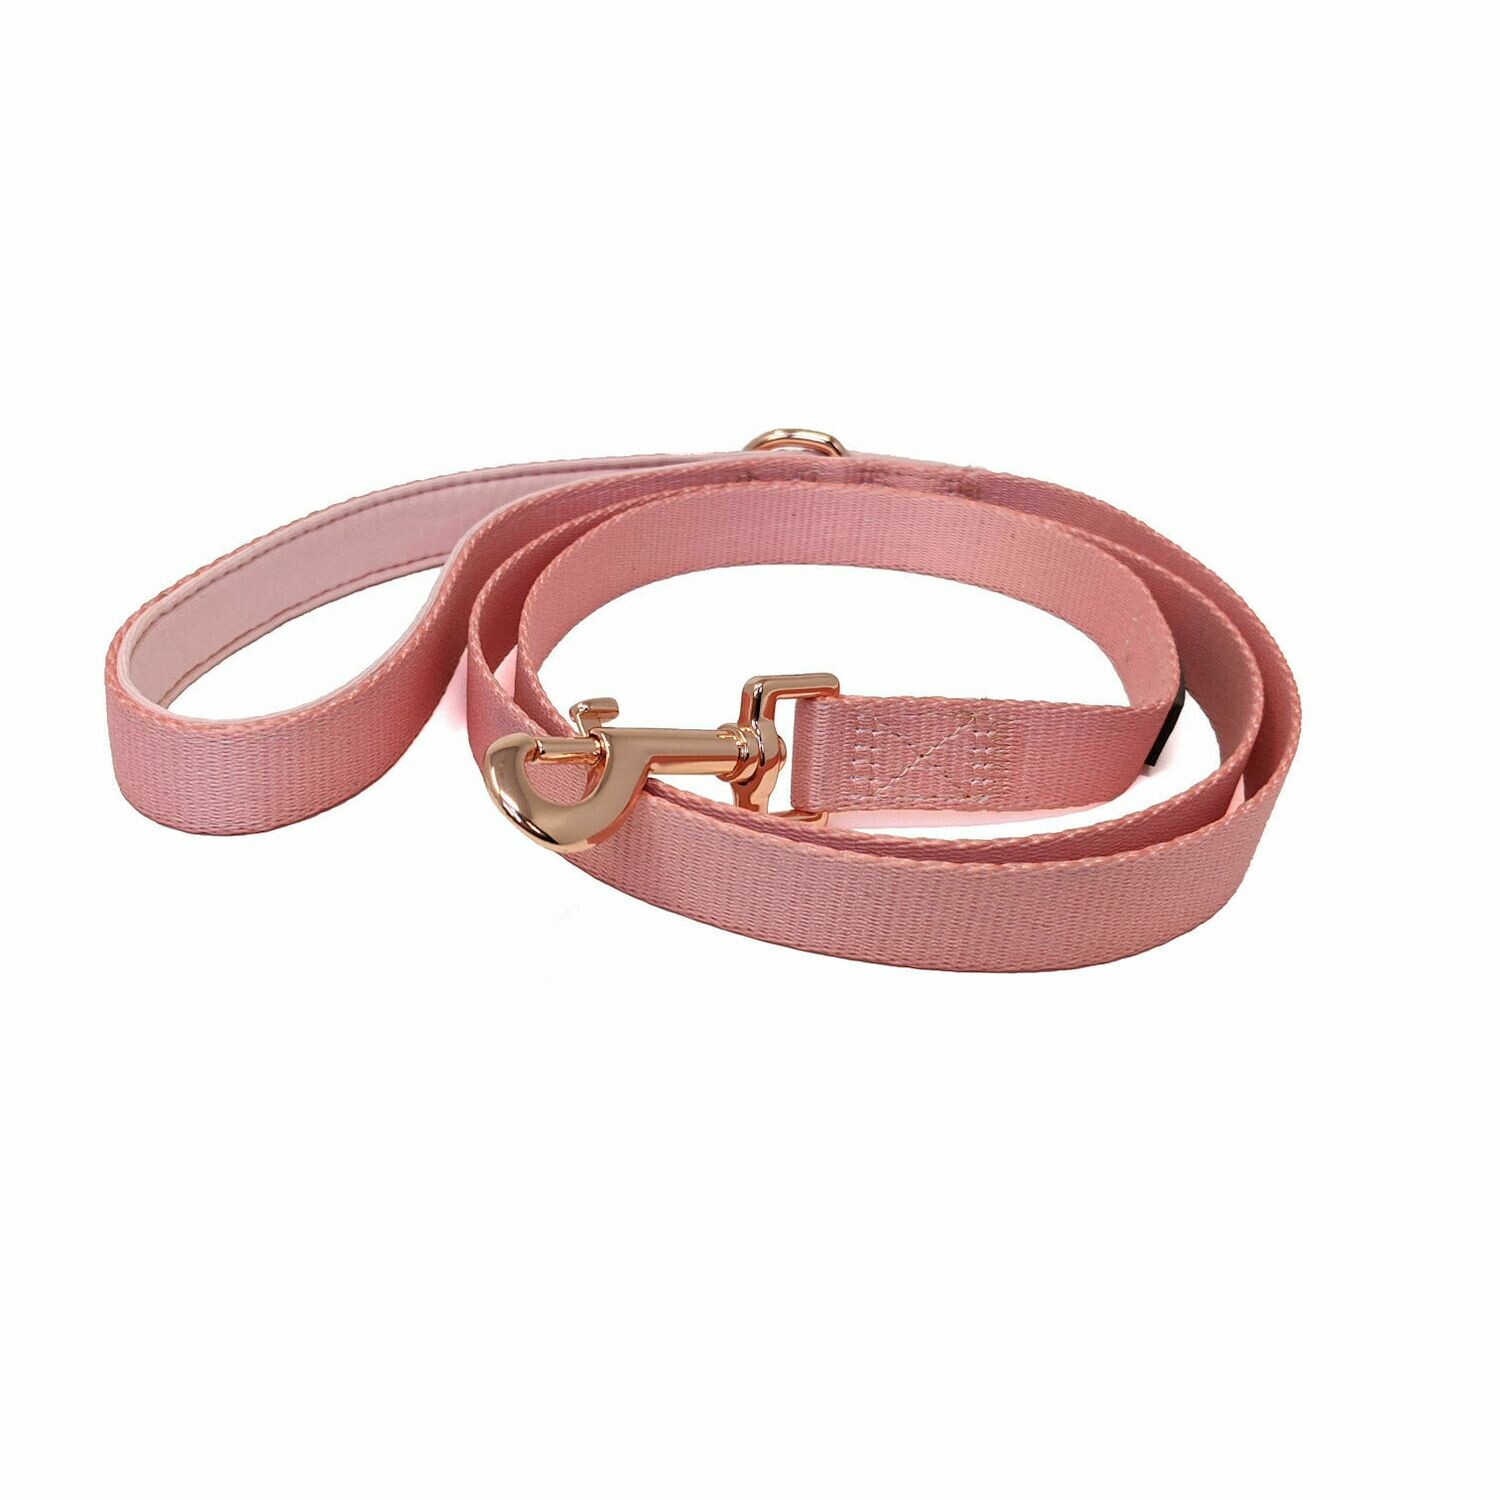 Pink and gold leash